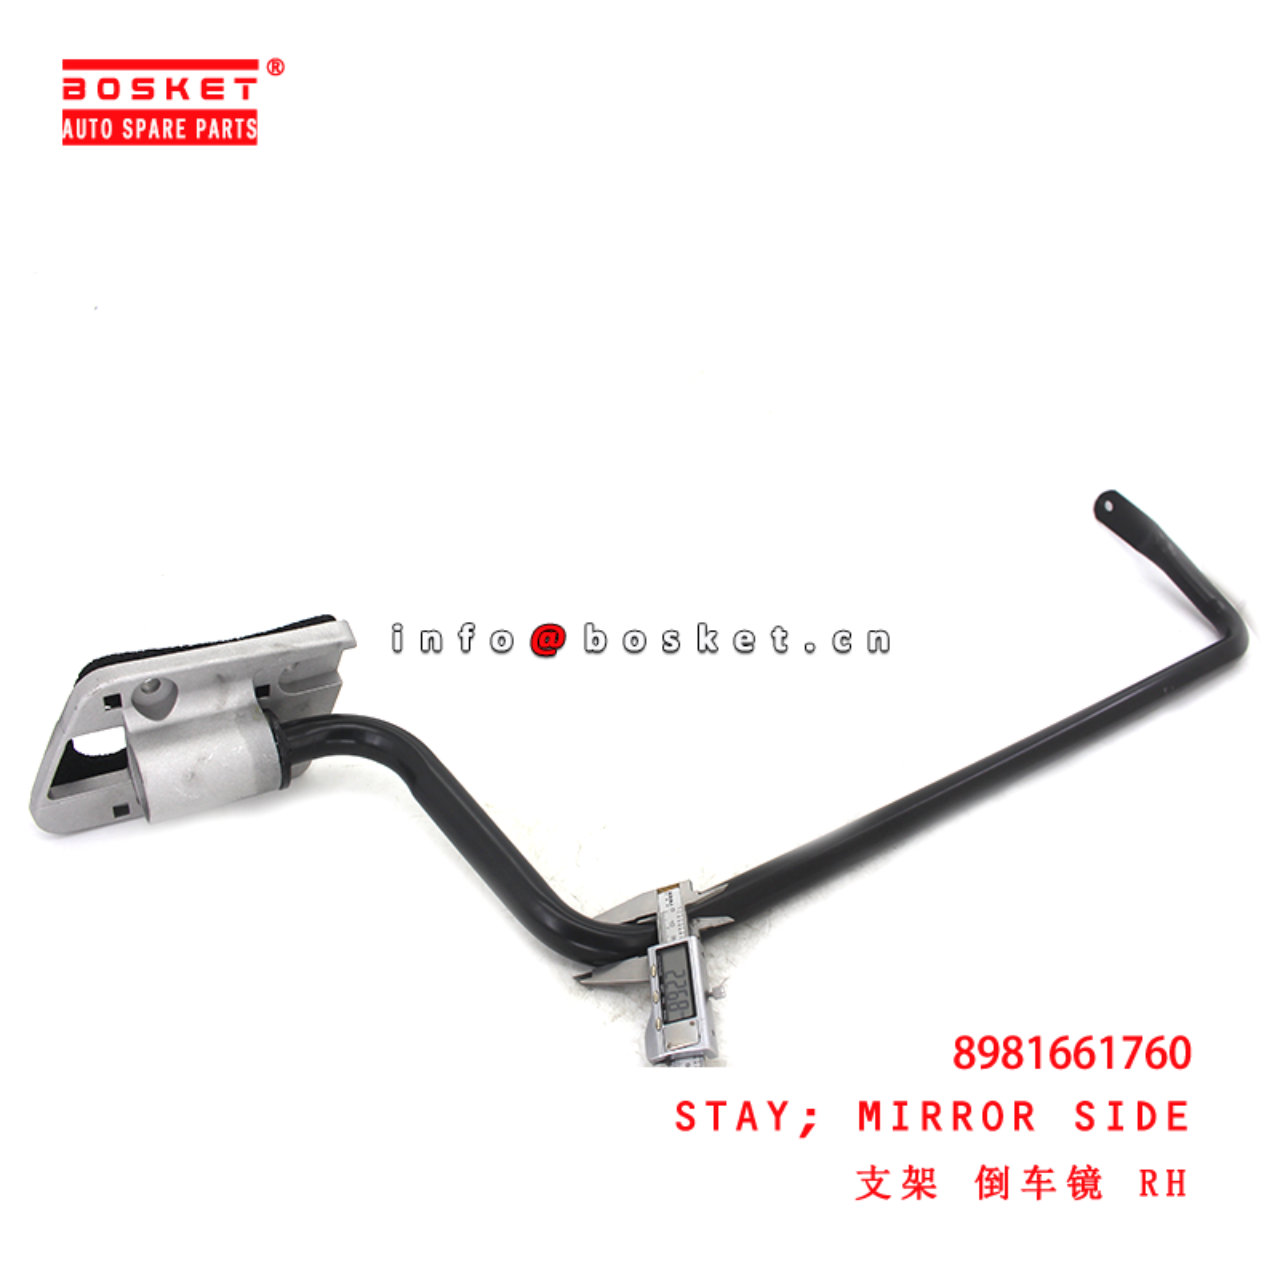 8-98166176-0 Mirror Side Stay suitable for ISUZU 700P NLR85 4HK1 8981661760